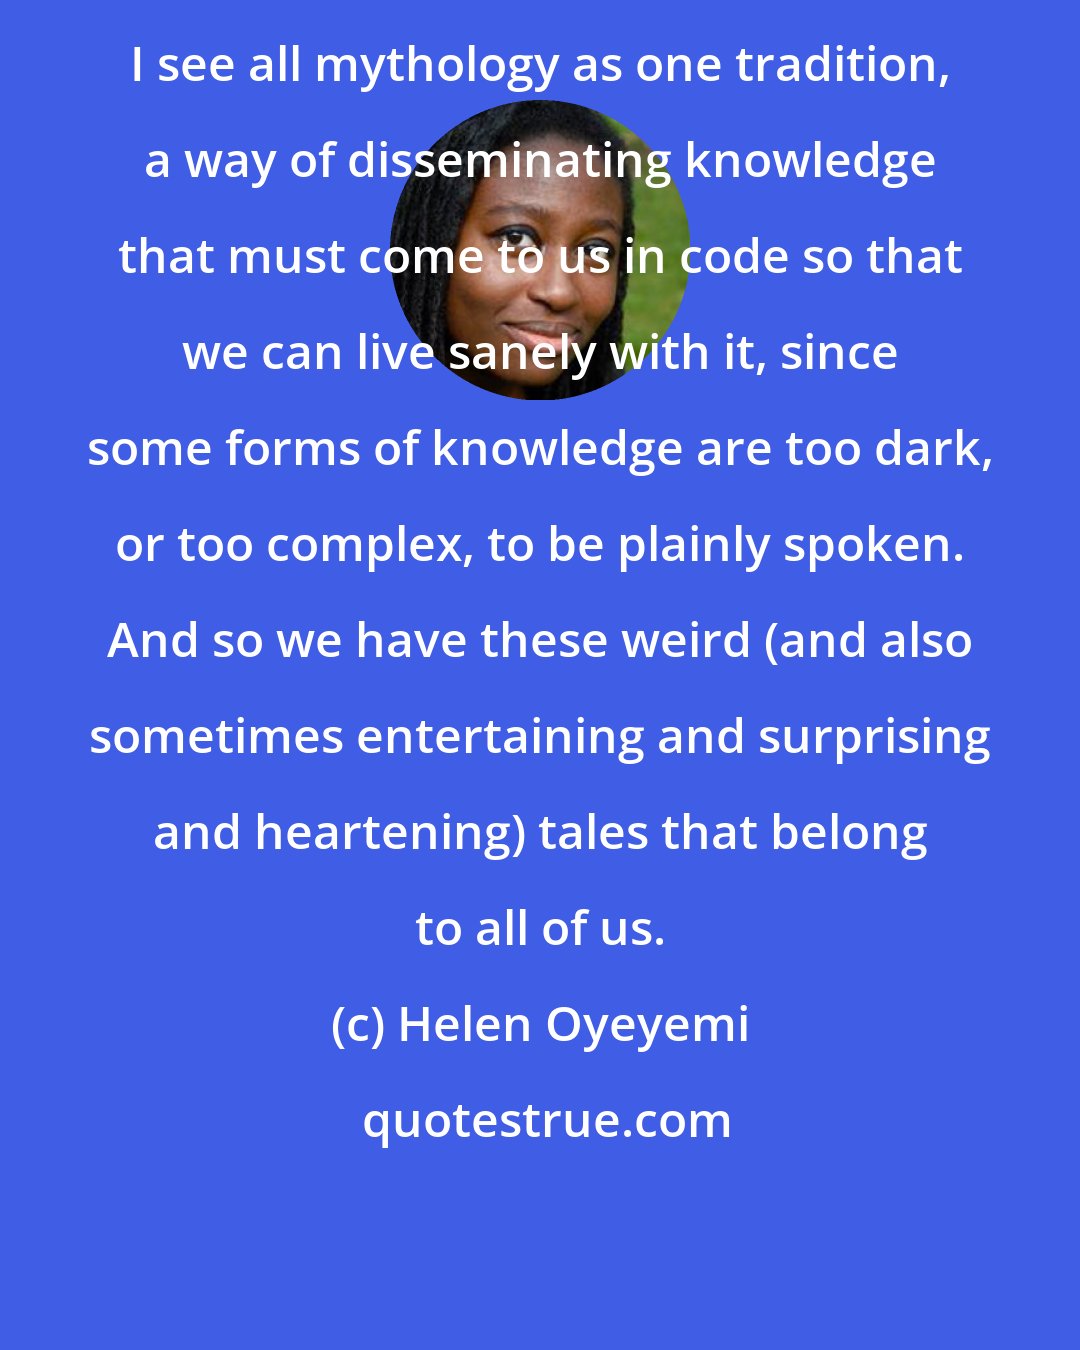 Helen Oyeyemi: I see all mythology as one tradition, a way of disseminating knowledge that must come to us in code so that we can live sanely with it, since some forms of knowledge are too dark, or too complex, to be plainly spoken. And so we have these weird (and also sometimes entertaining and surprising and heartening) tales that belong to all of us.